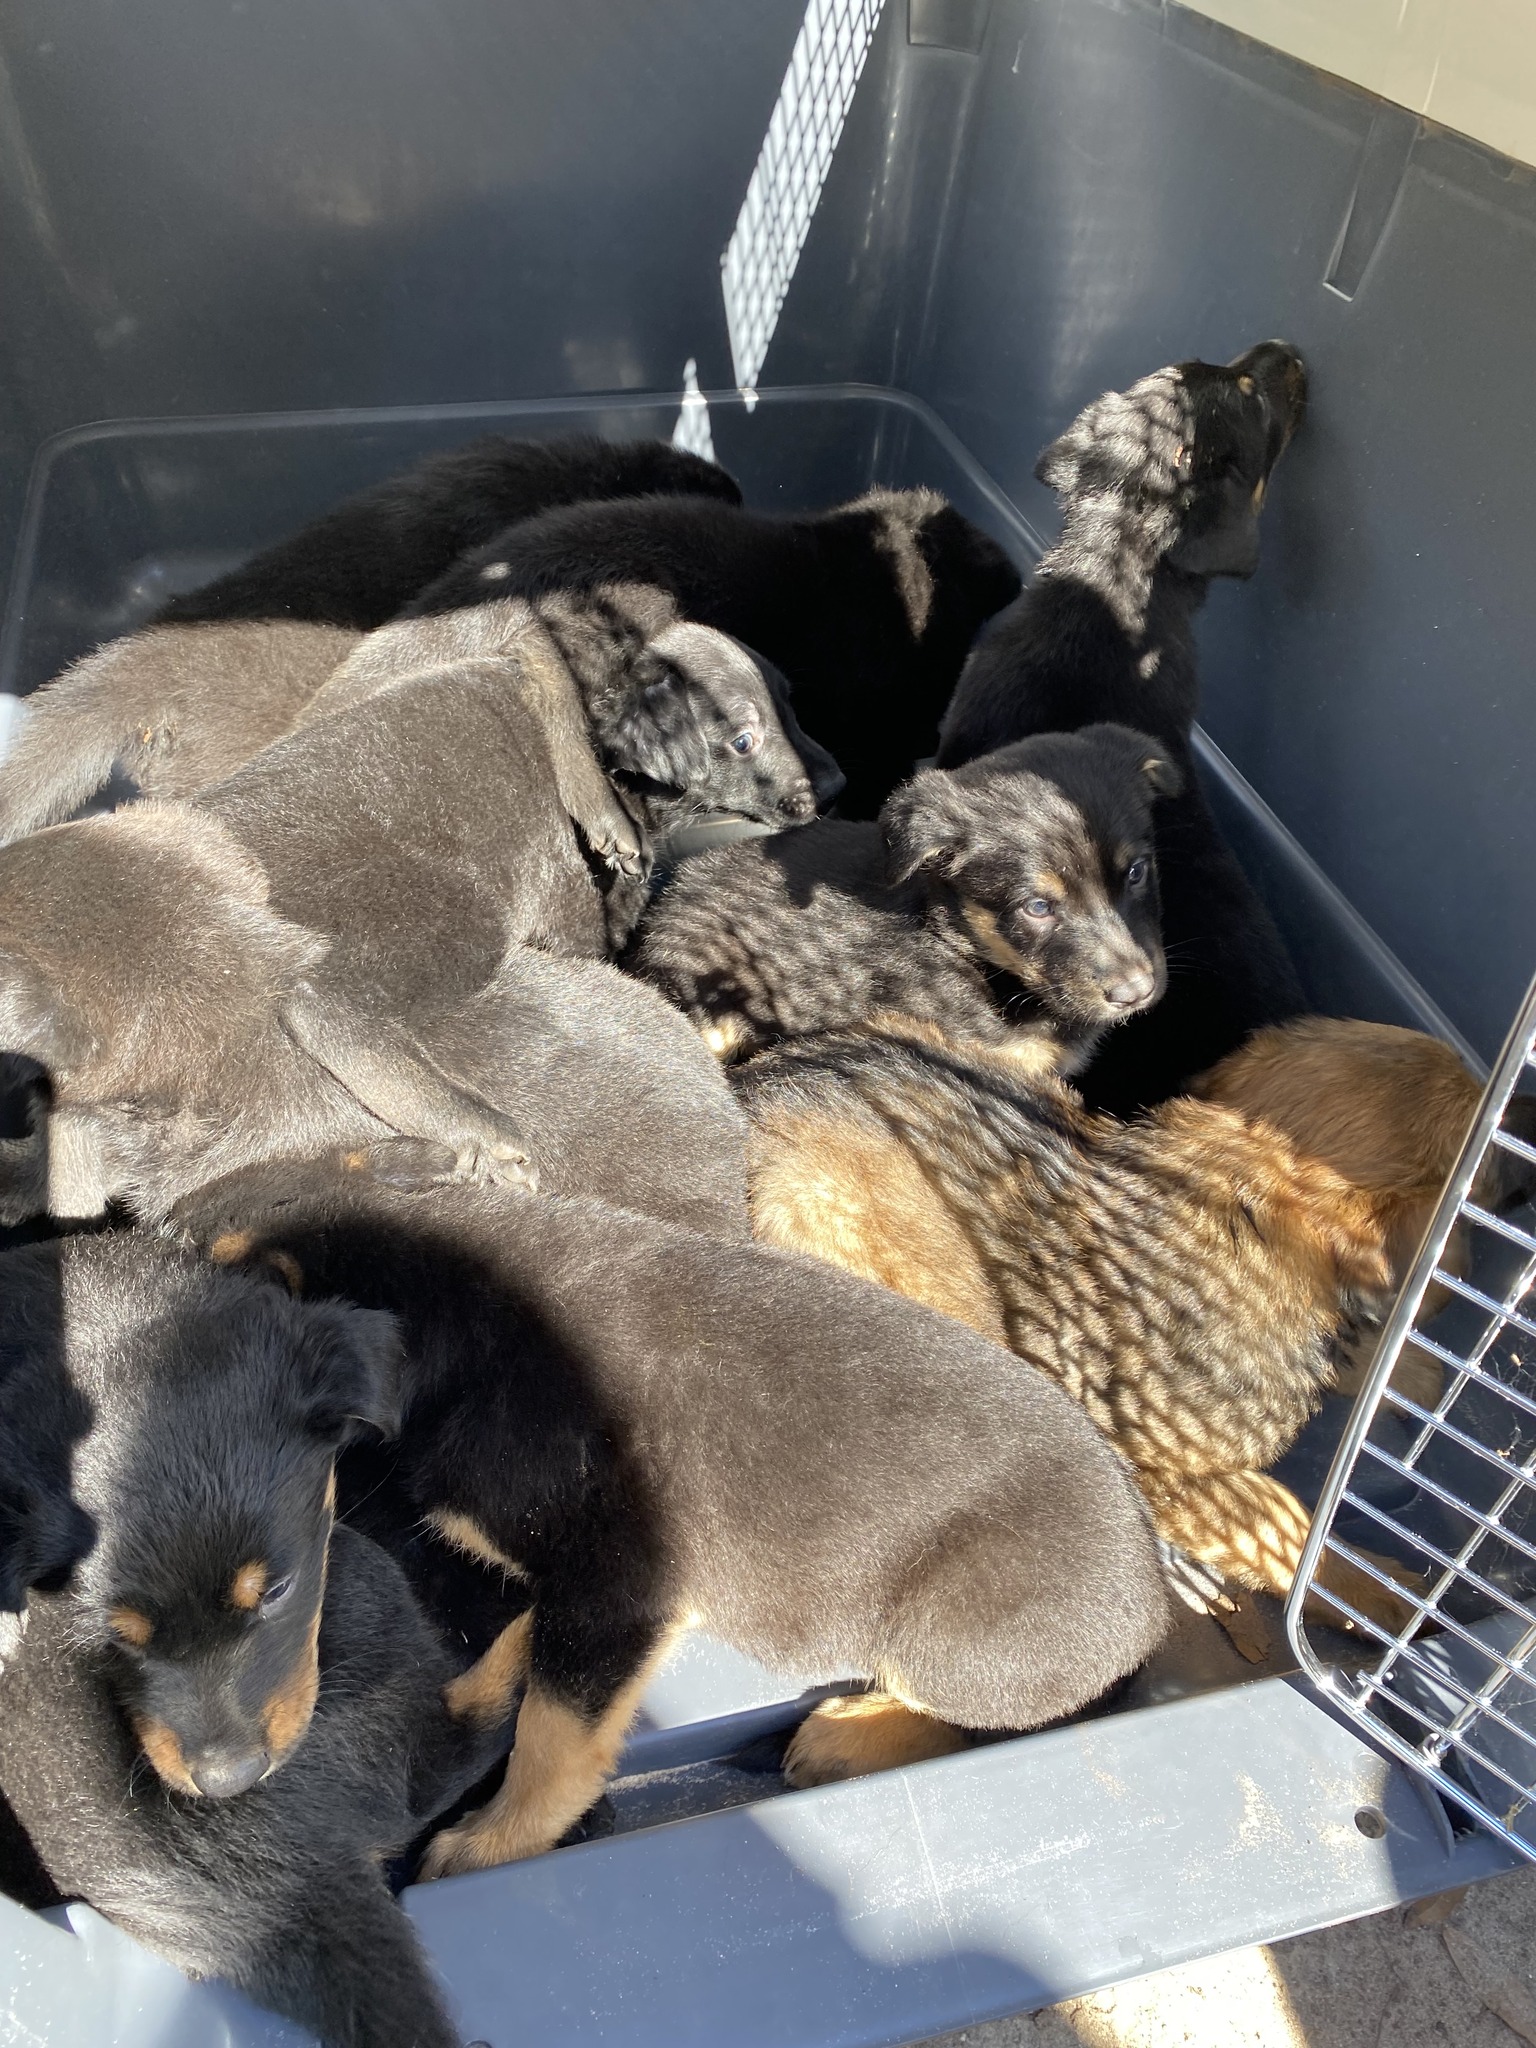 Flordia Couple Arrested in Iverness for Animal Cruelty, Roughly 16 dogs ...